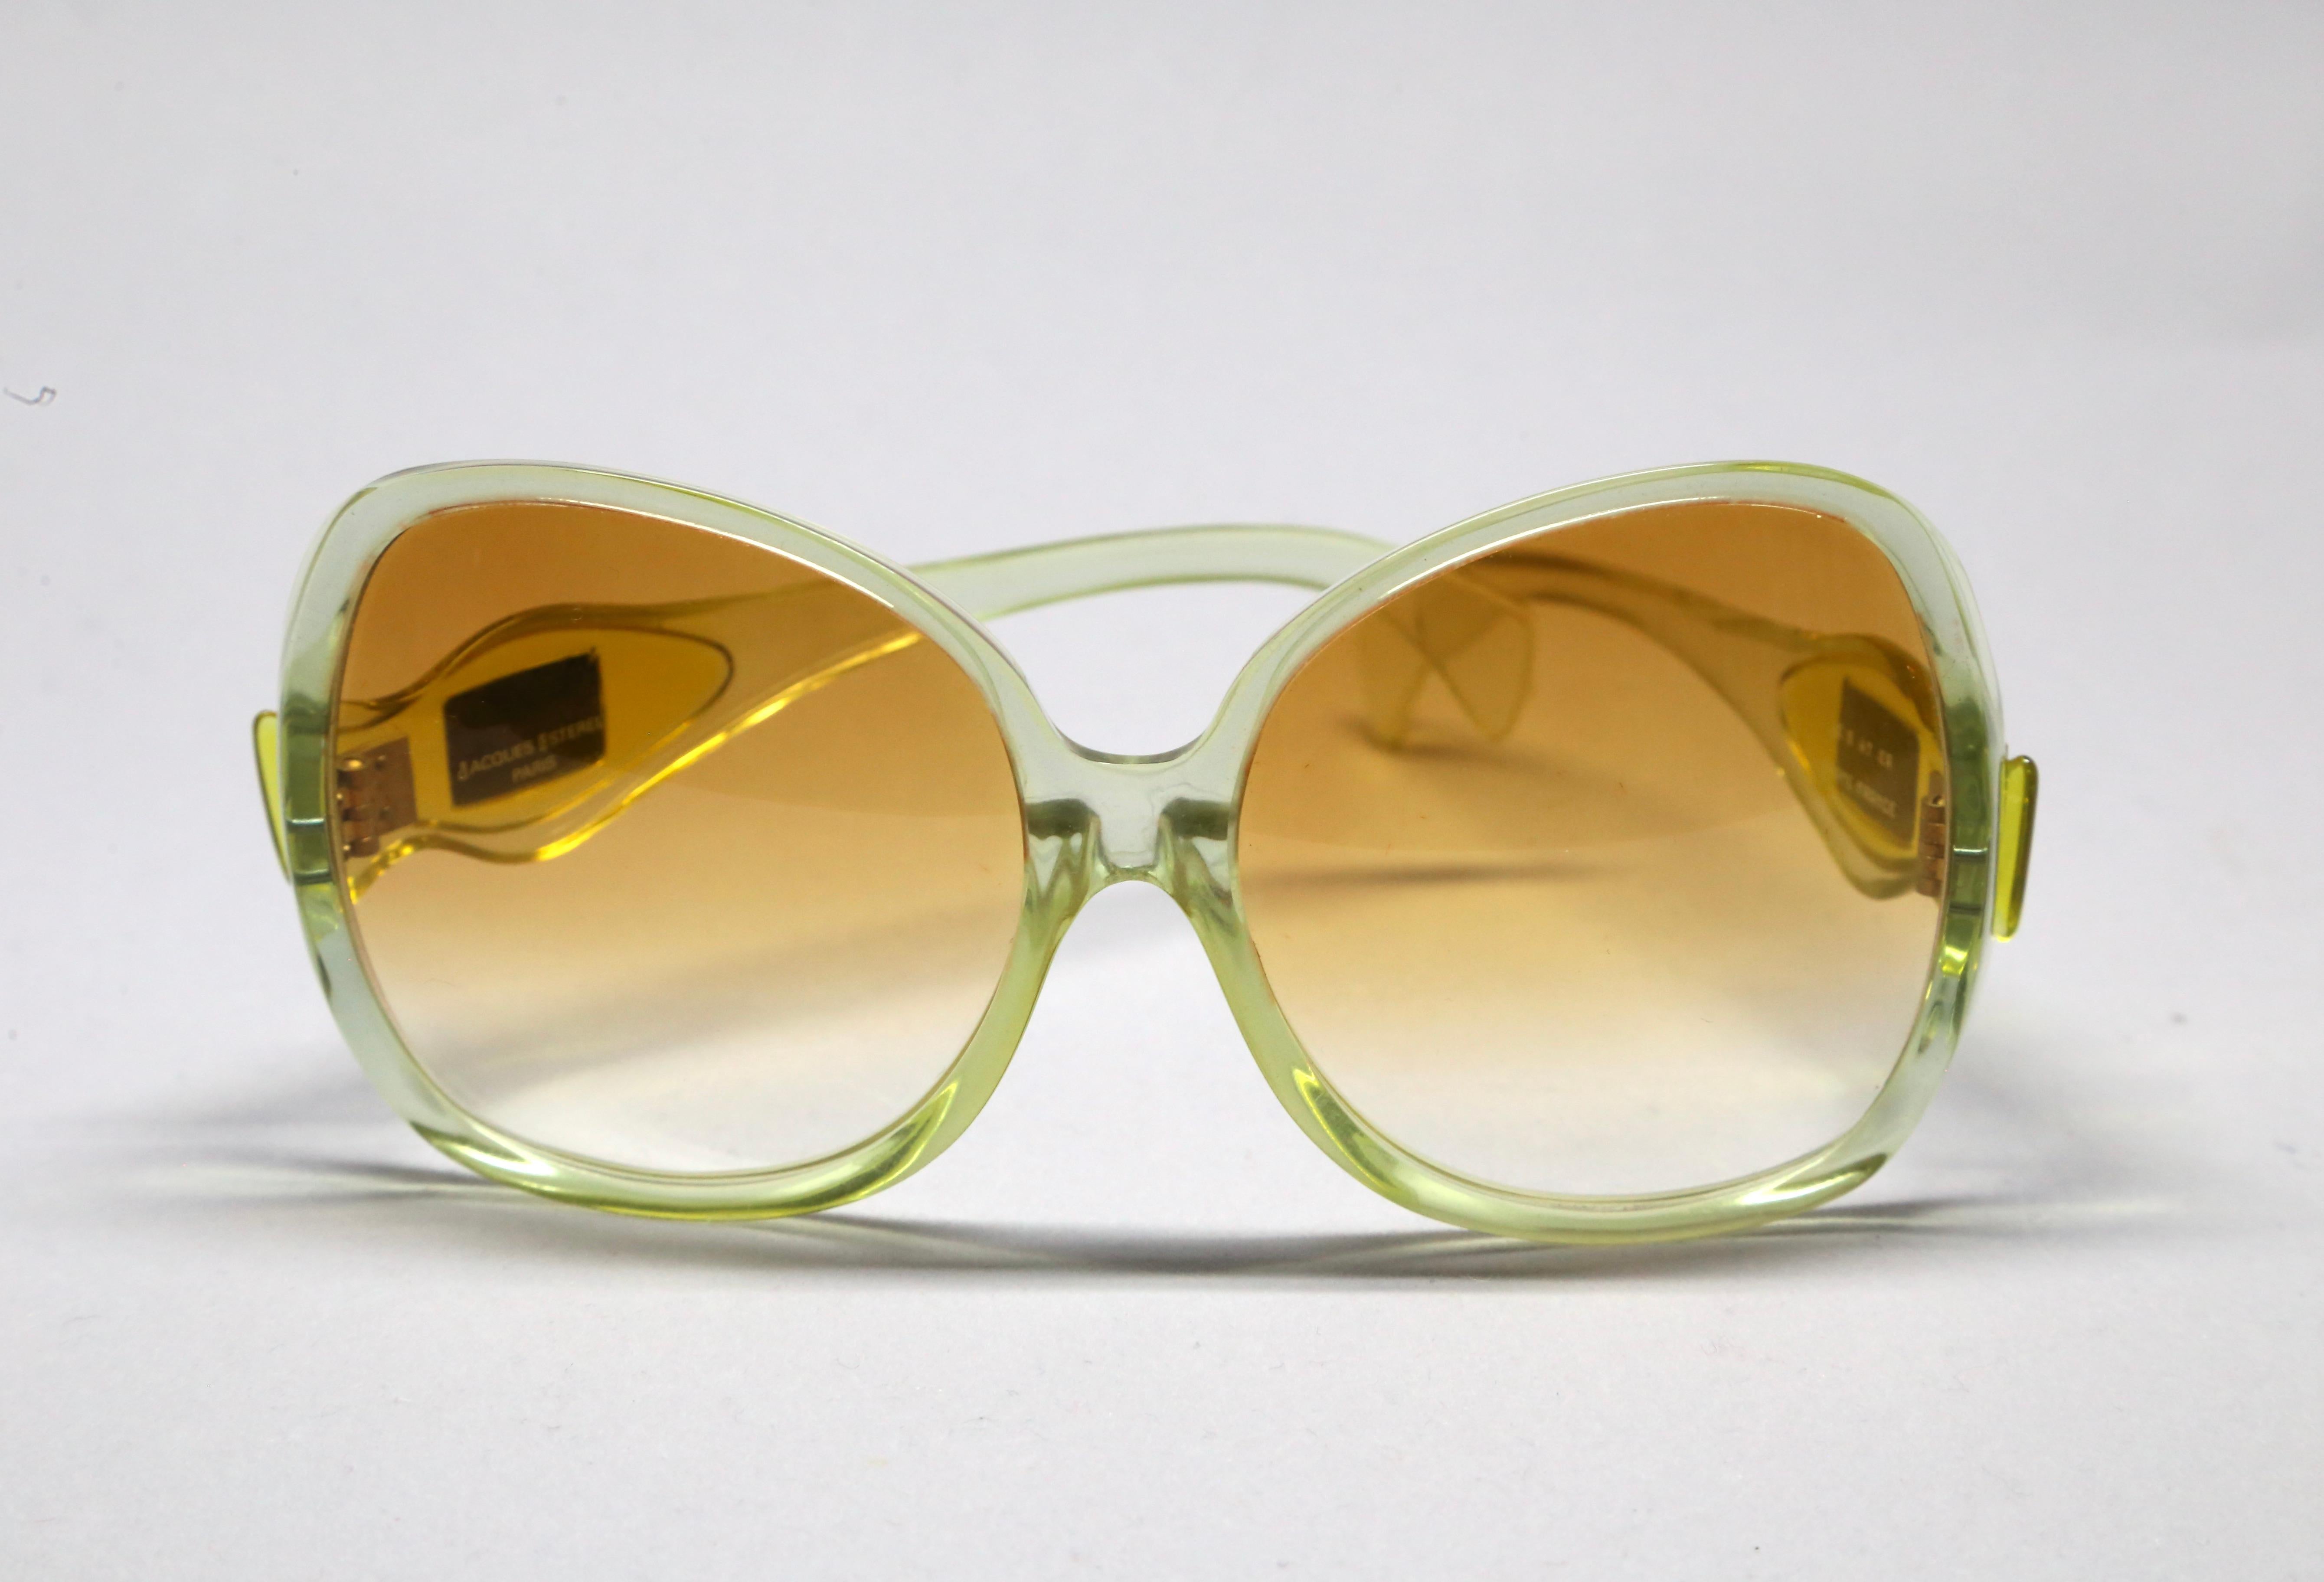 Oversized transparent yellow acetate sunglasses with brown gradient lenses from Jacques Esterel dating to the 1970's.  JE logos at temples. Approximate measurements: 
• frame height: 67mm
• temple length (from the hinge and including ear bend):